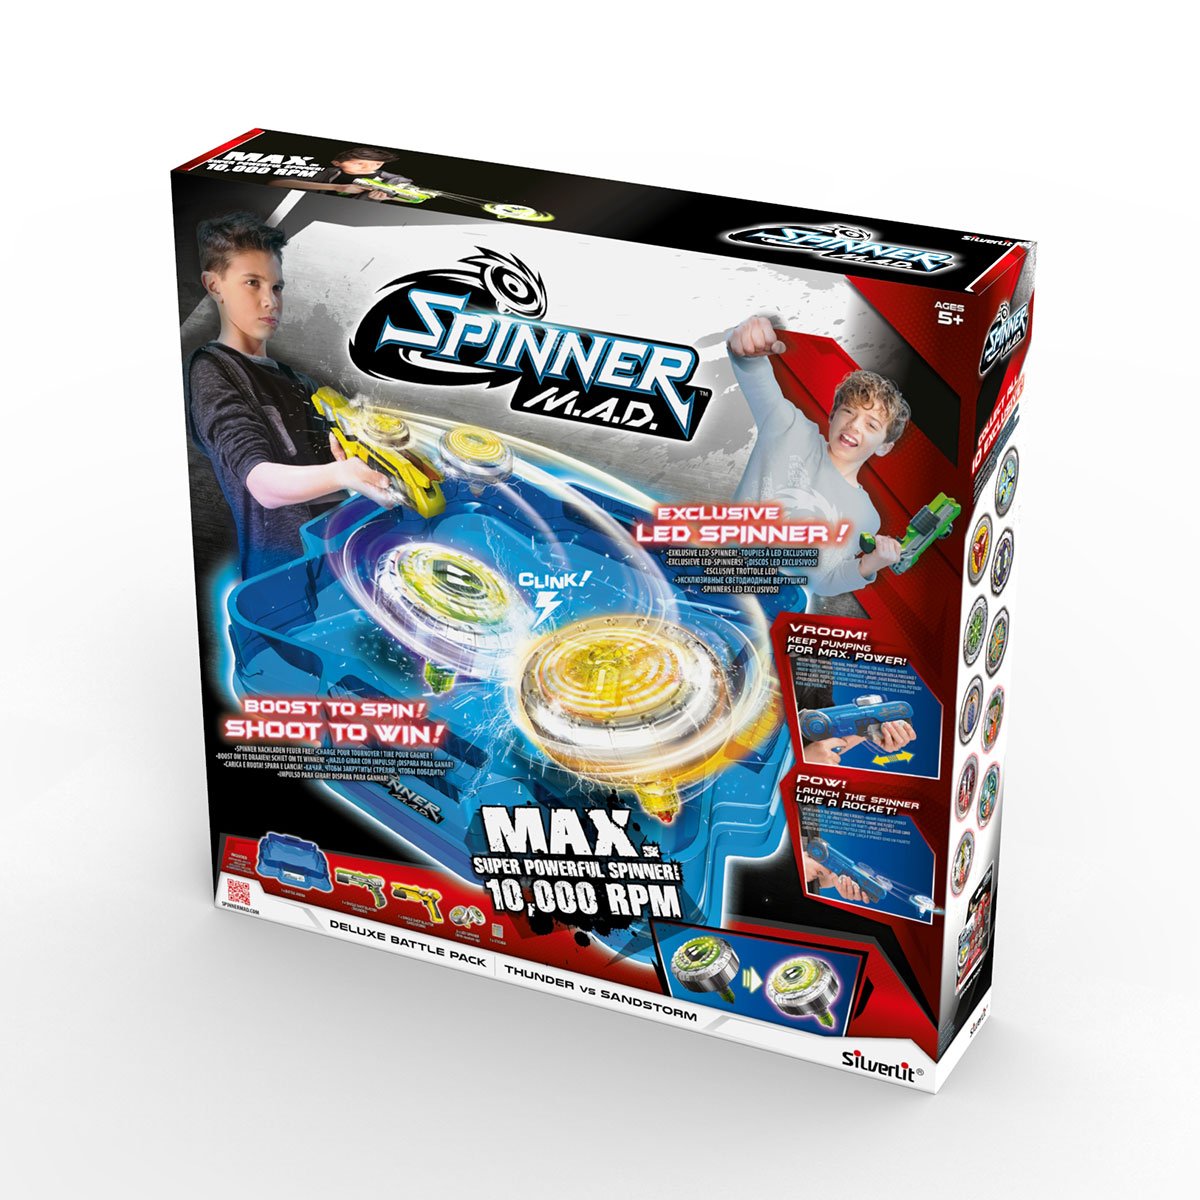 Spin deluxe. Spinner Mad волчки. Игрушка Spinner Mad. Боевая Арена Spinner Mad. Делюкс пак.